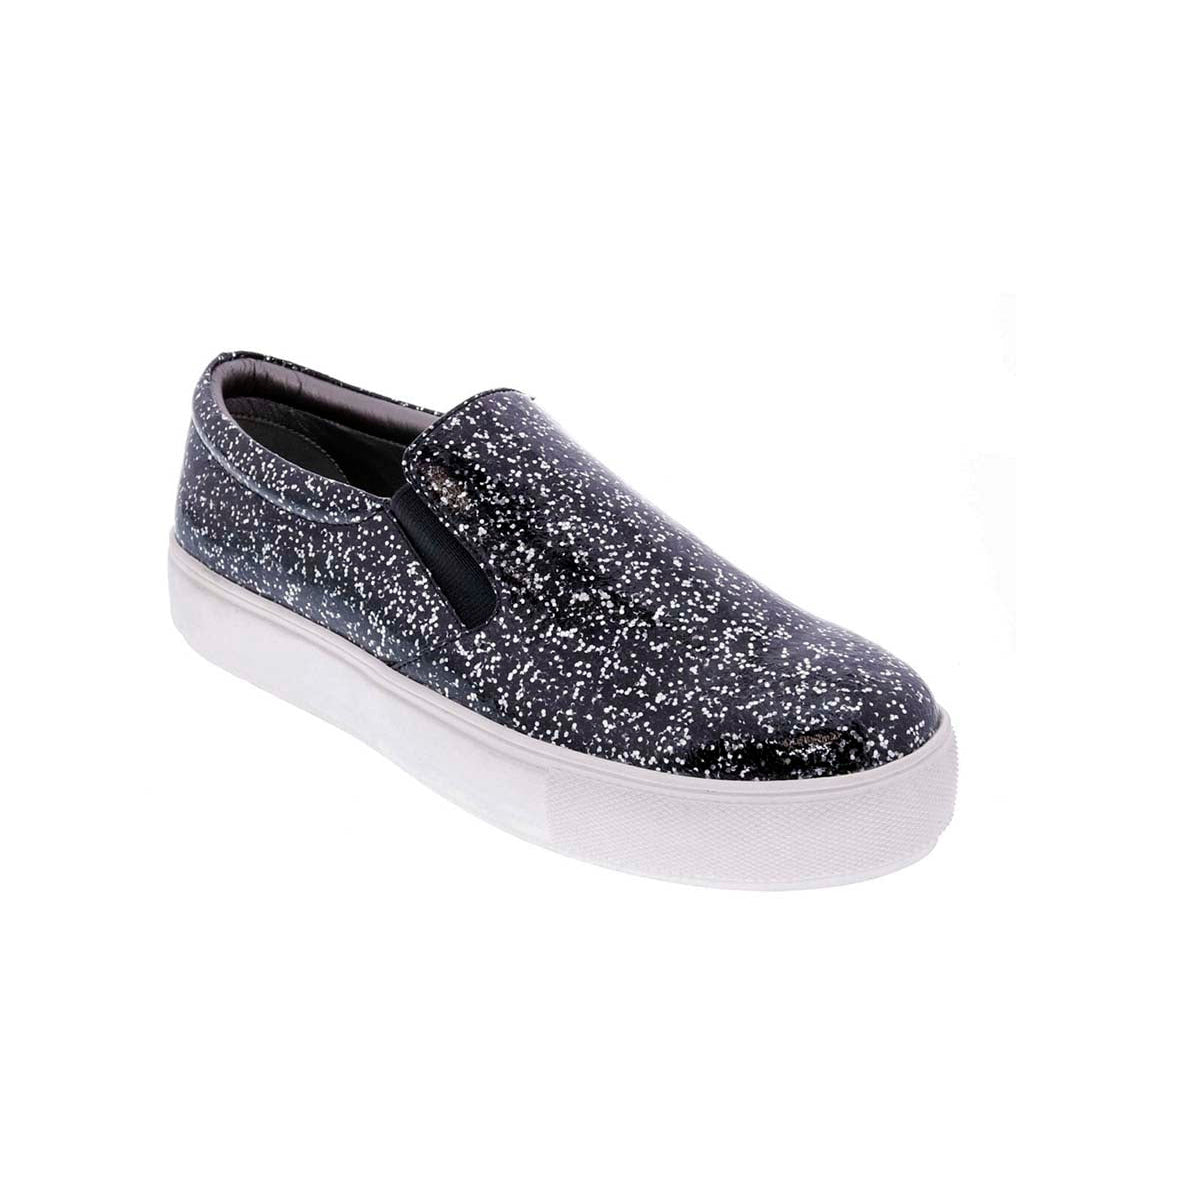 BELLINI ACCENT WOMEN SLIP-ON SHOE'S IN BLACK SPARKLE - TLW Shoes